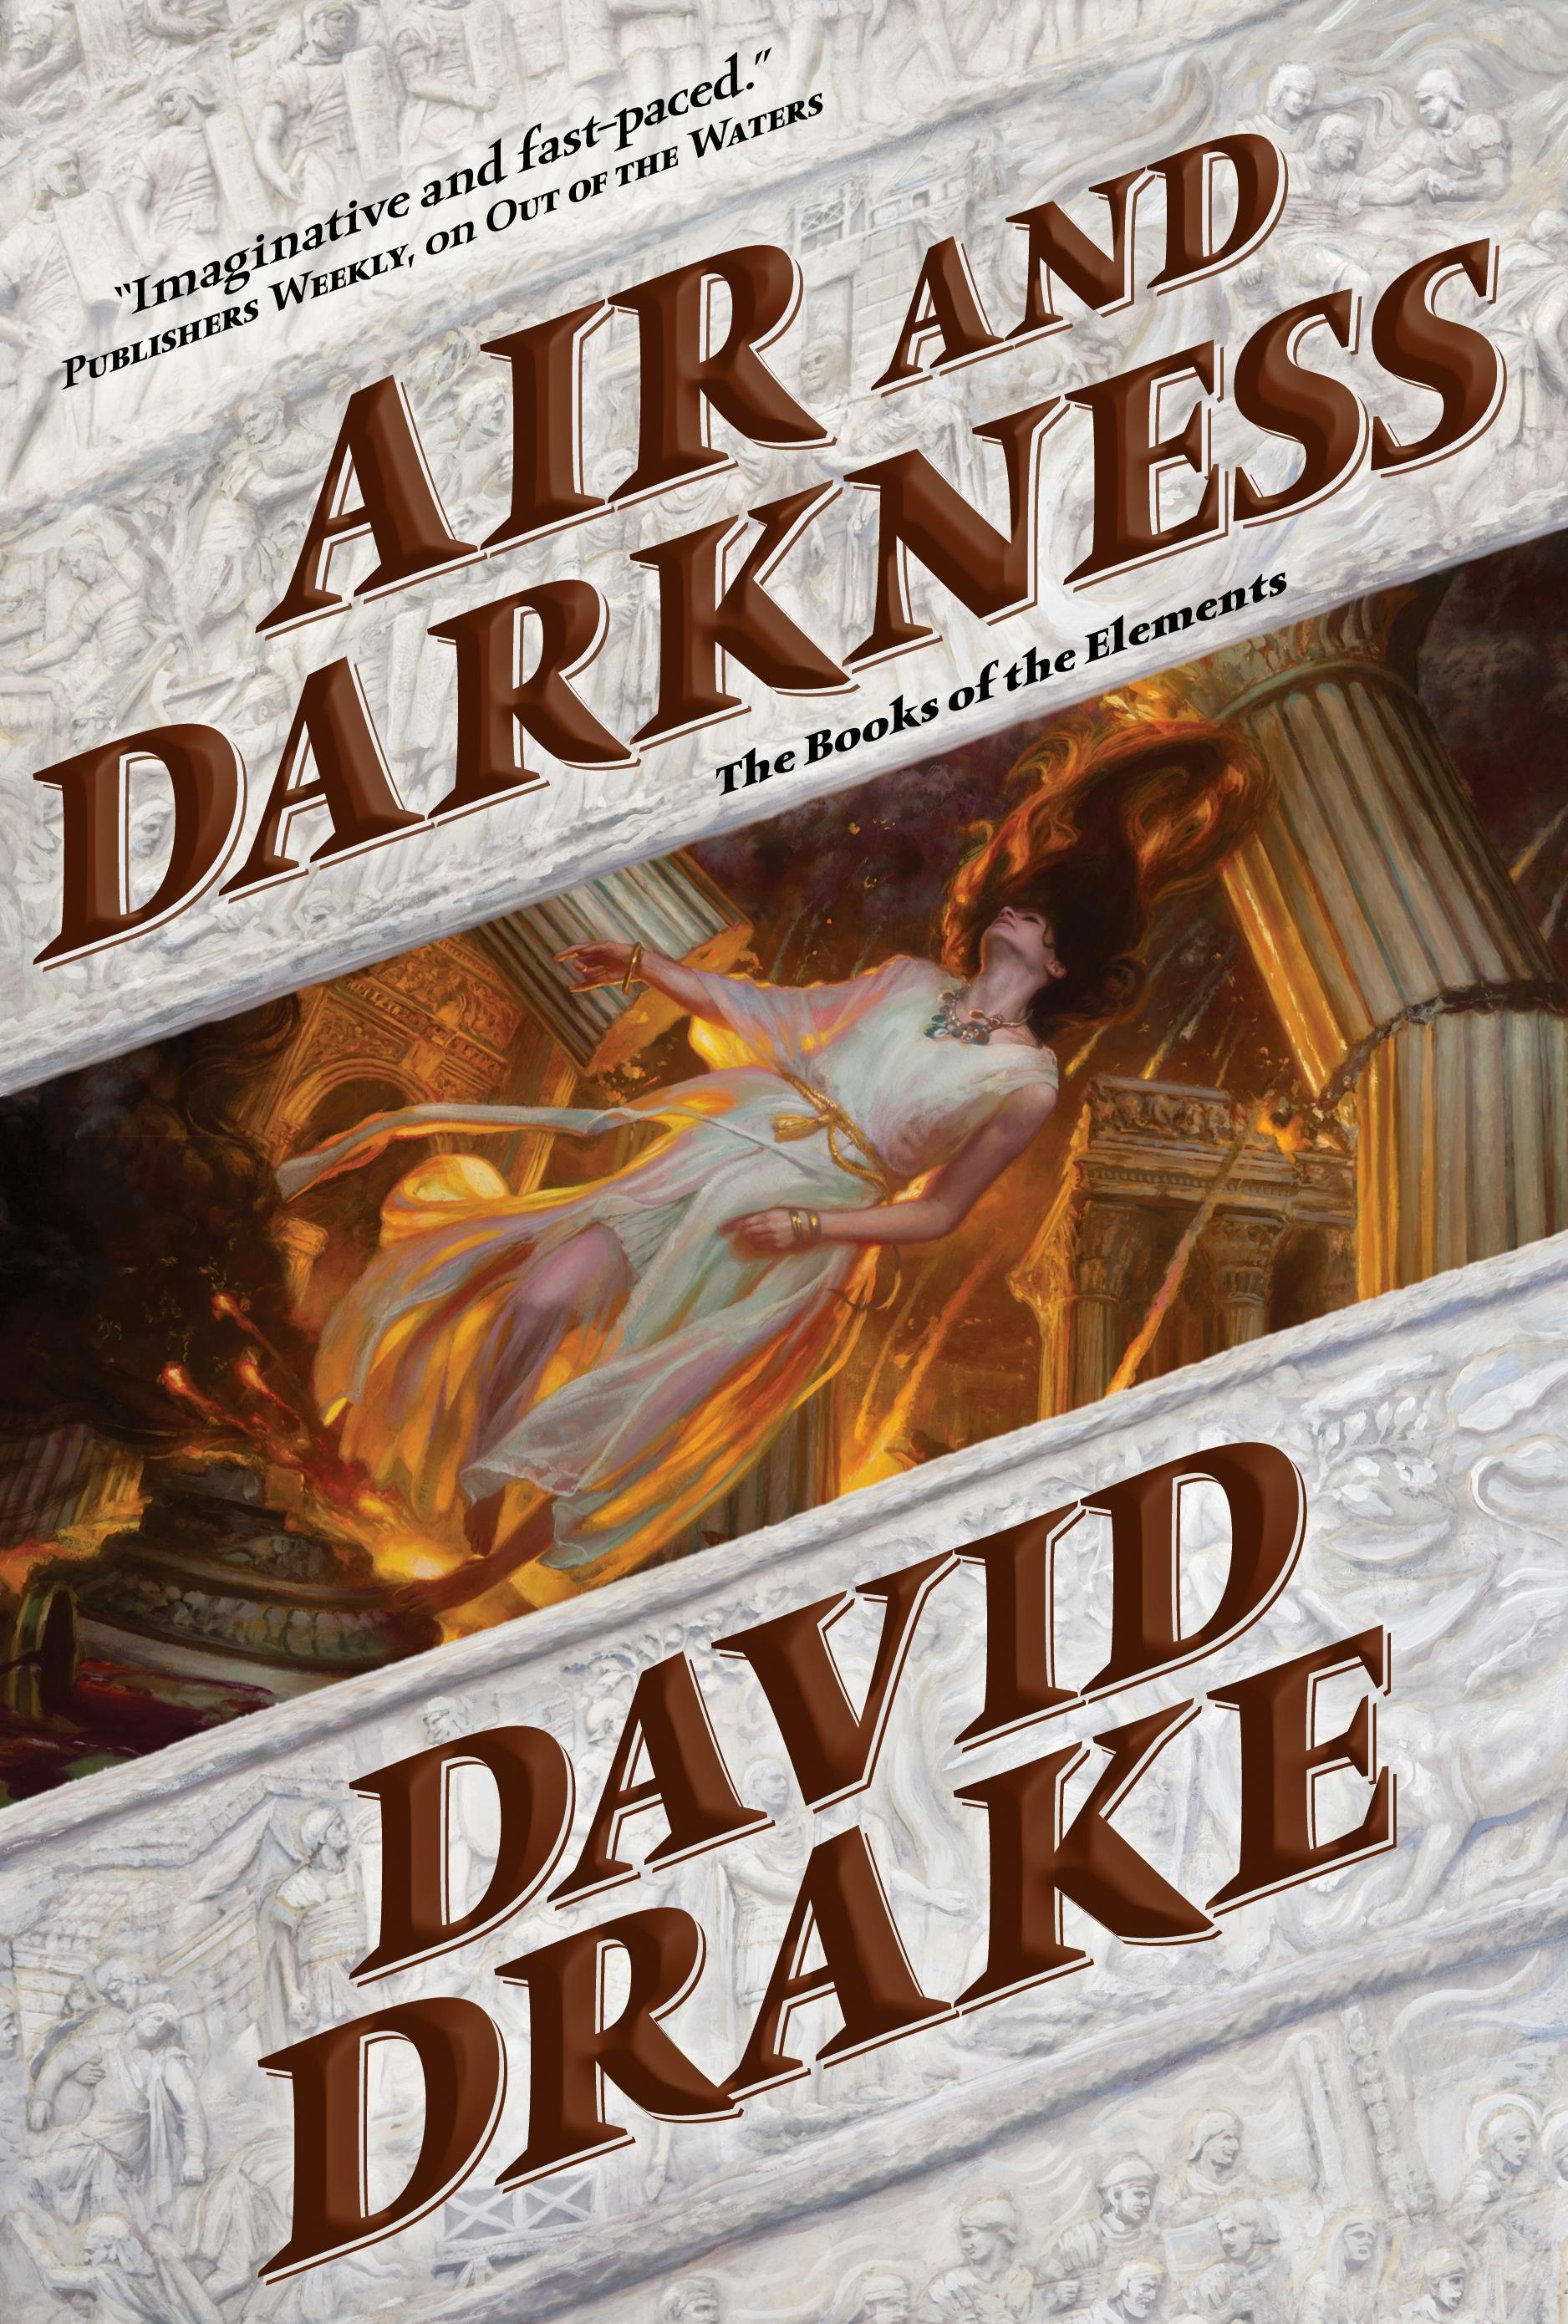 Cover for the book titled as: Air and Darkness